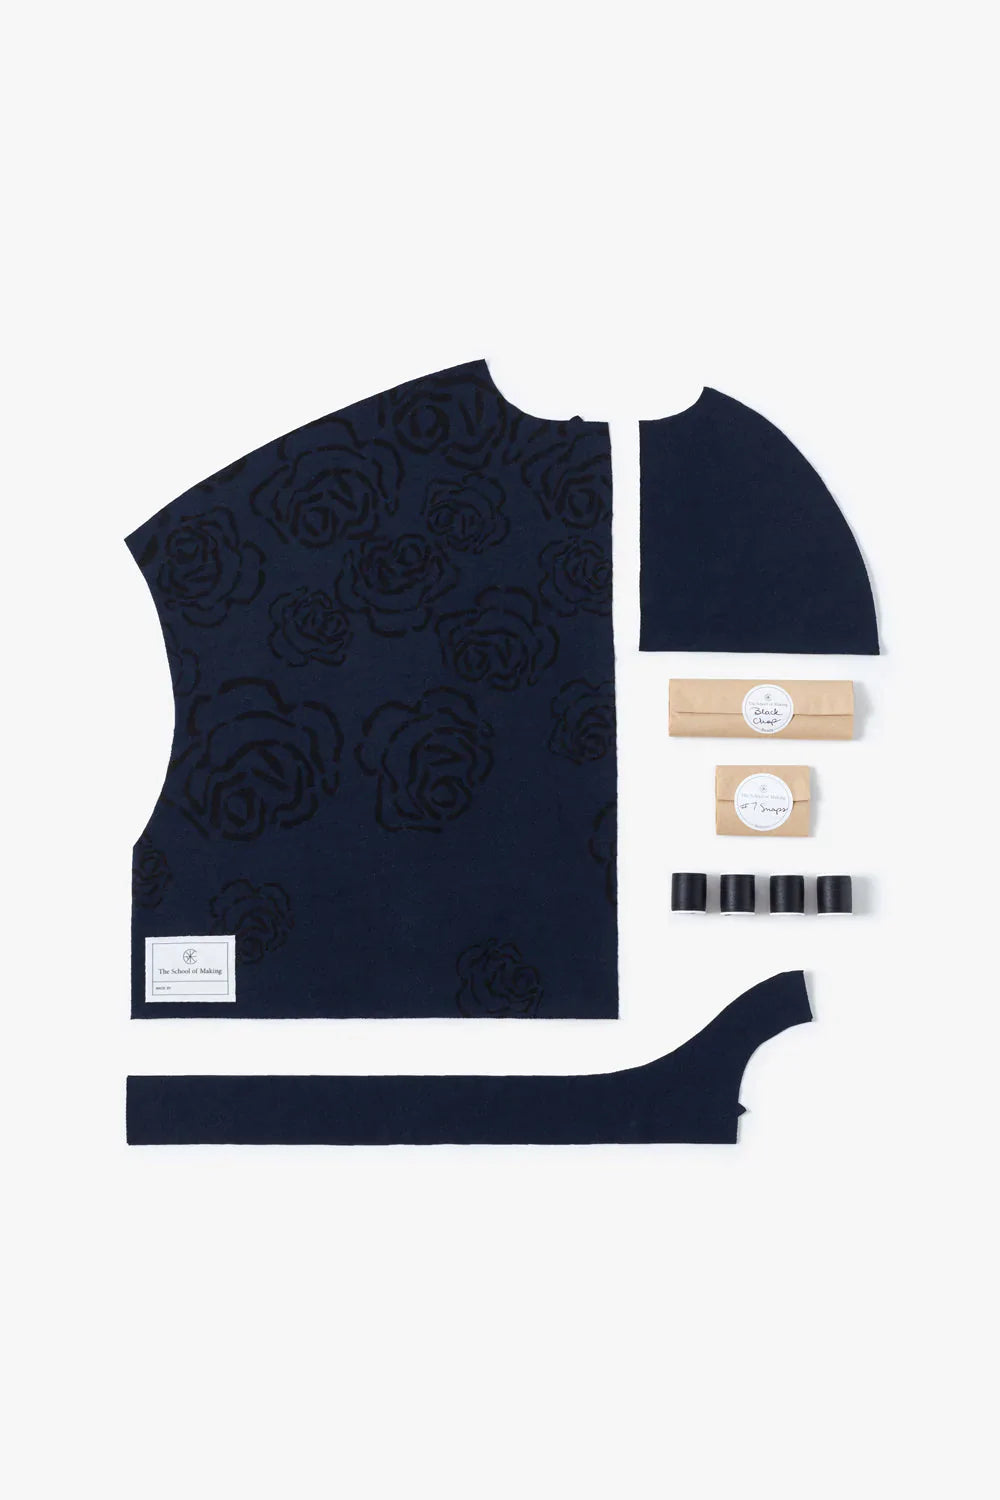 Contents of The School of Making Kristina’s Rose Cropped Car Jacket DIY Kit in Black and Navy.